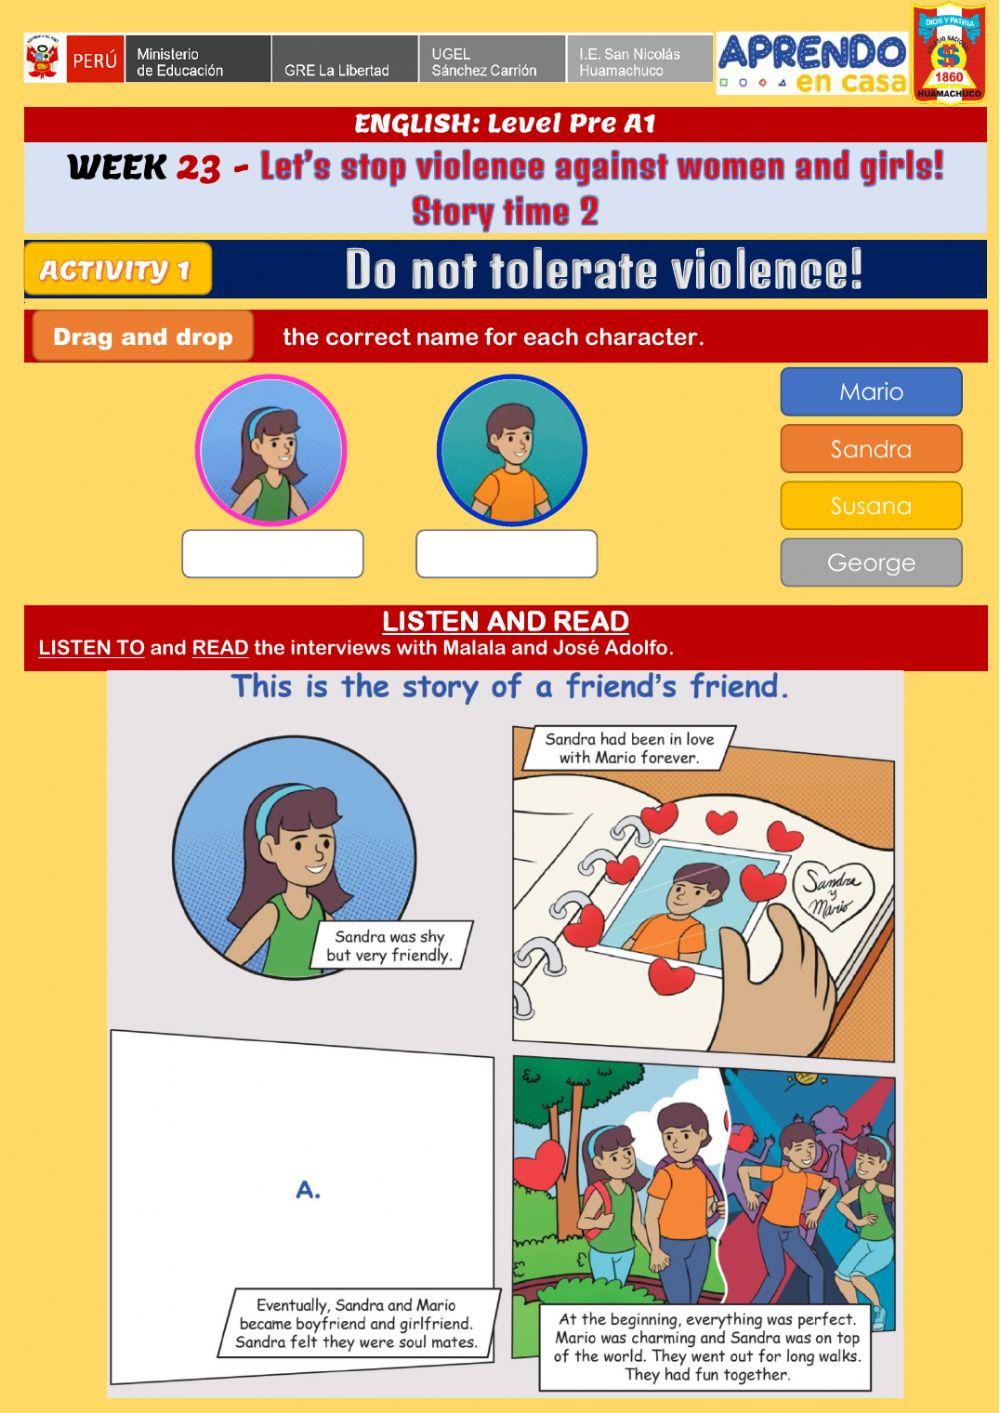 Let’s stop violence against women and girls! - Do not tolerate violence!